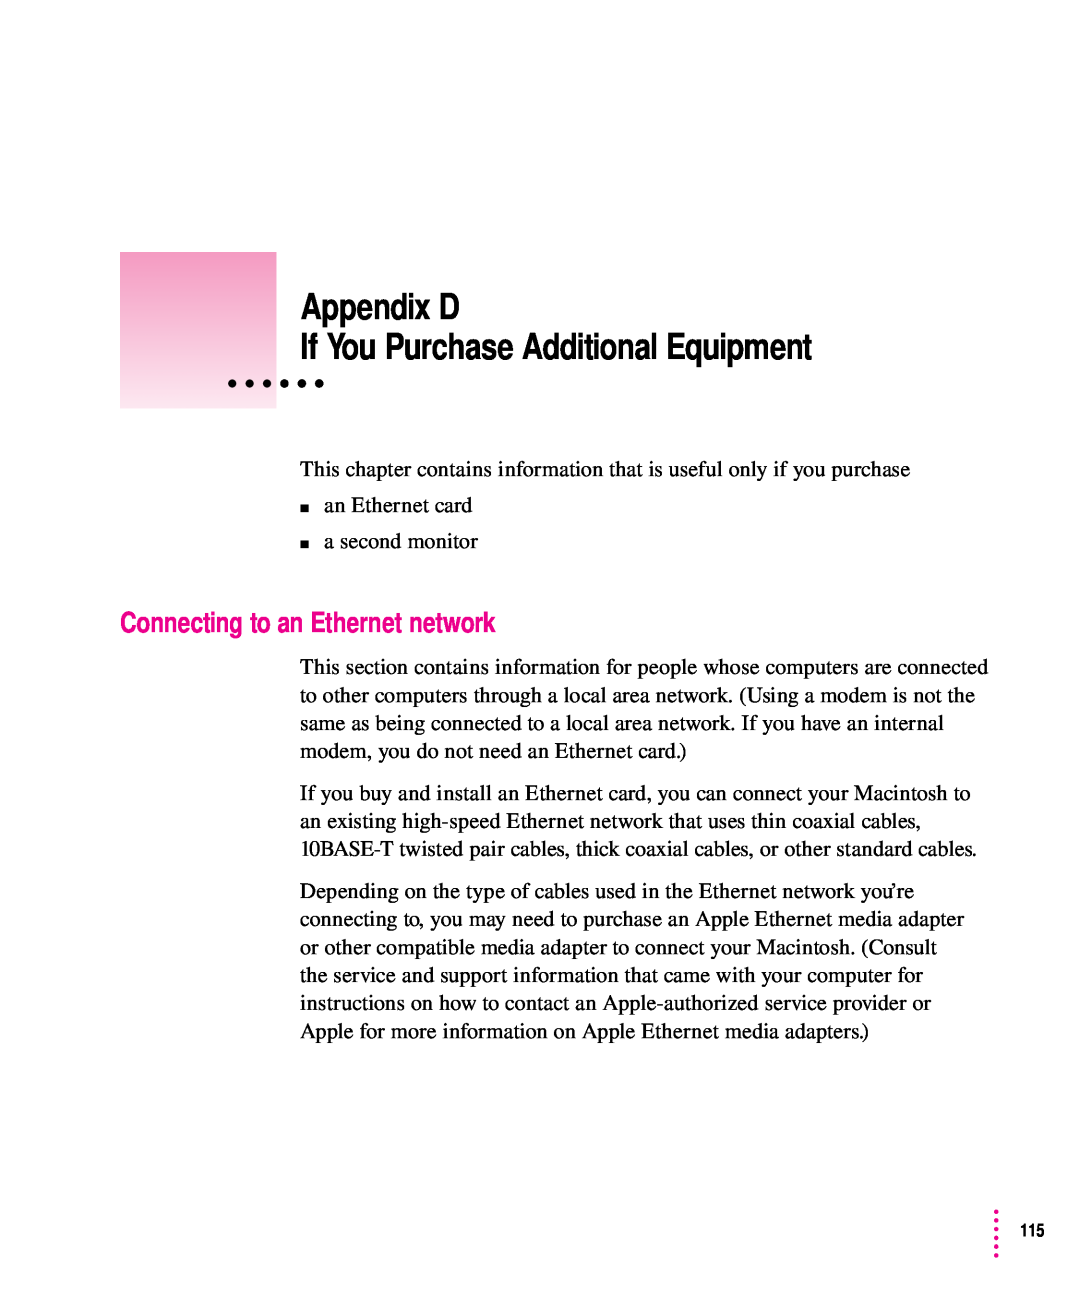 Apple 5200CD, 5300CD manual Appendix D If You Purchase Additional Equipment, Connecting to an Ethernet network 